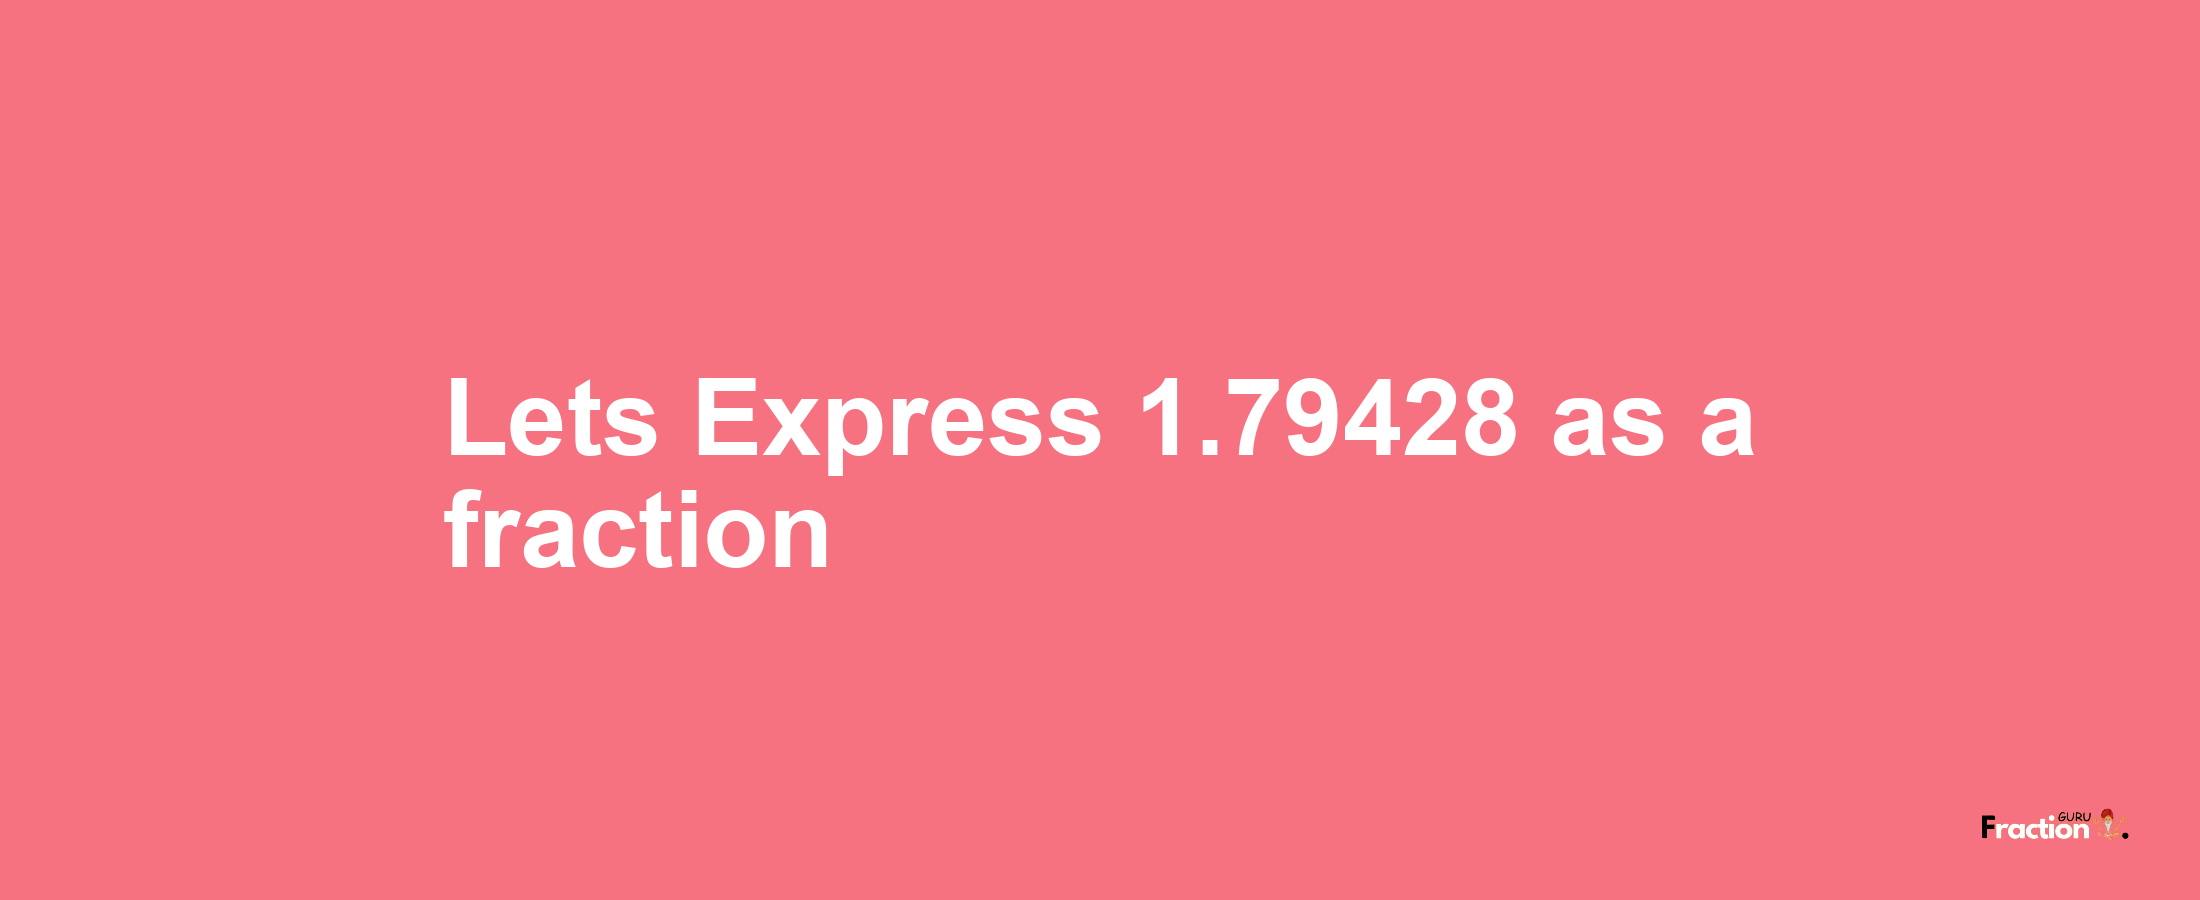 Lets Express 1.79428 as afraction